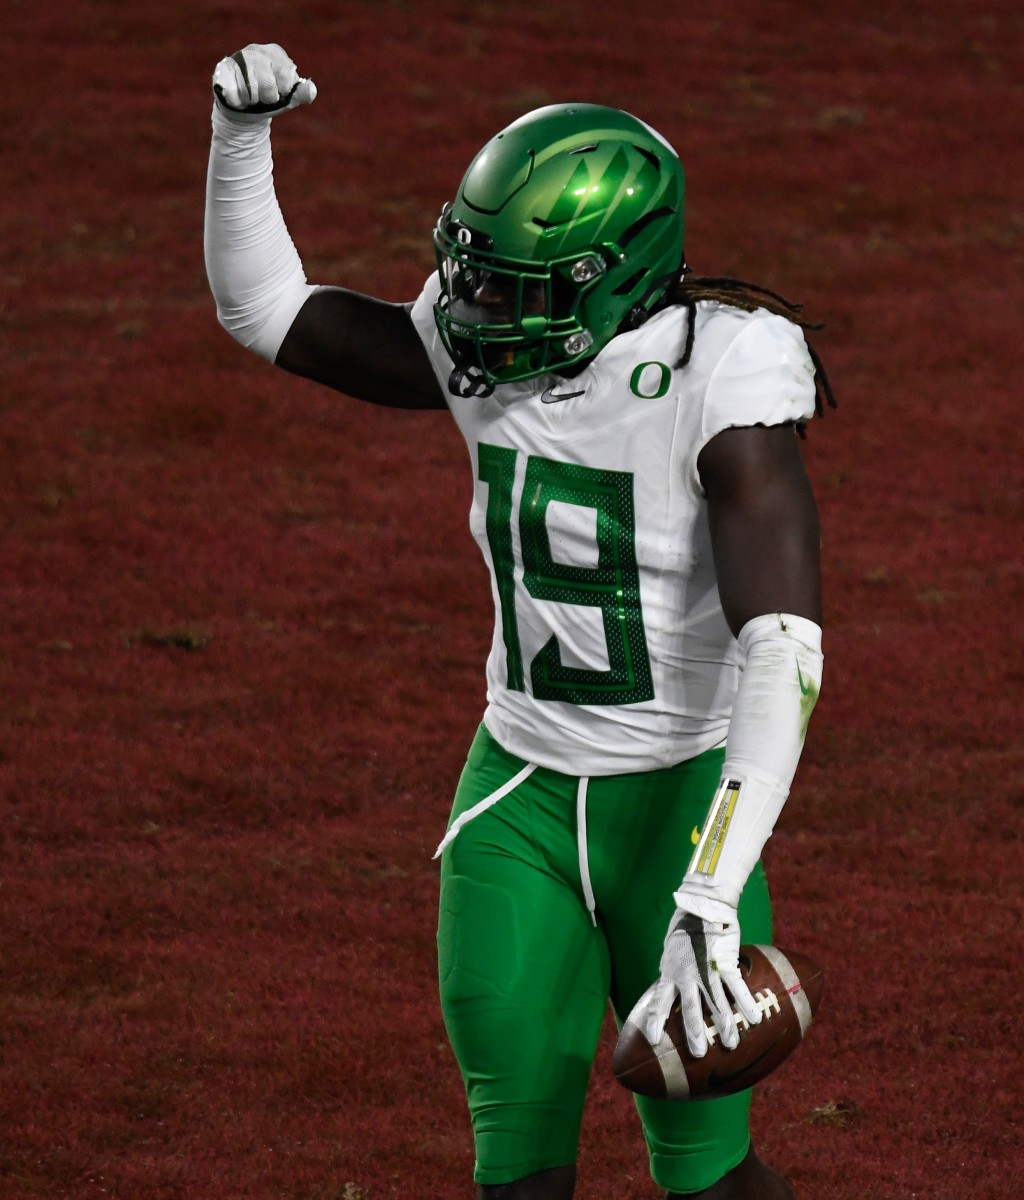 Jamal Hill celebrates an interception against USC in the 2020 Pac-12 Championship Game.